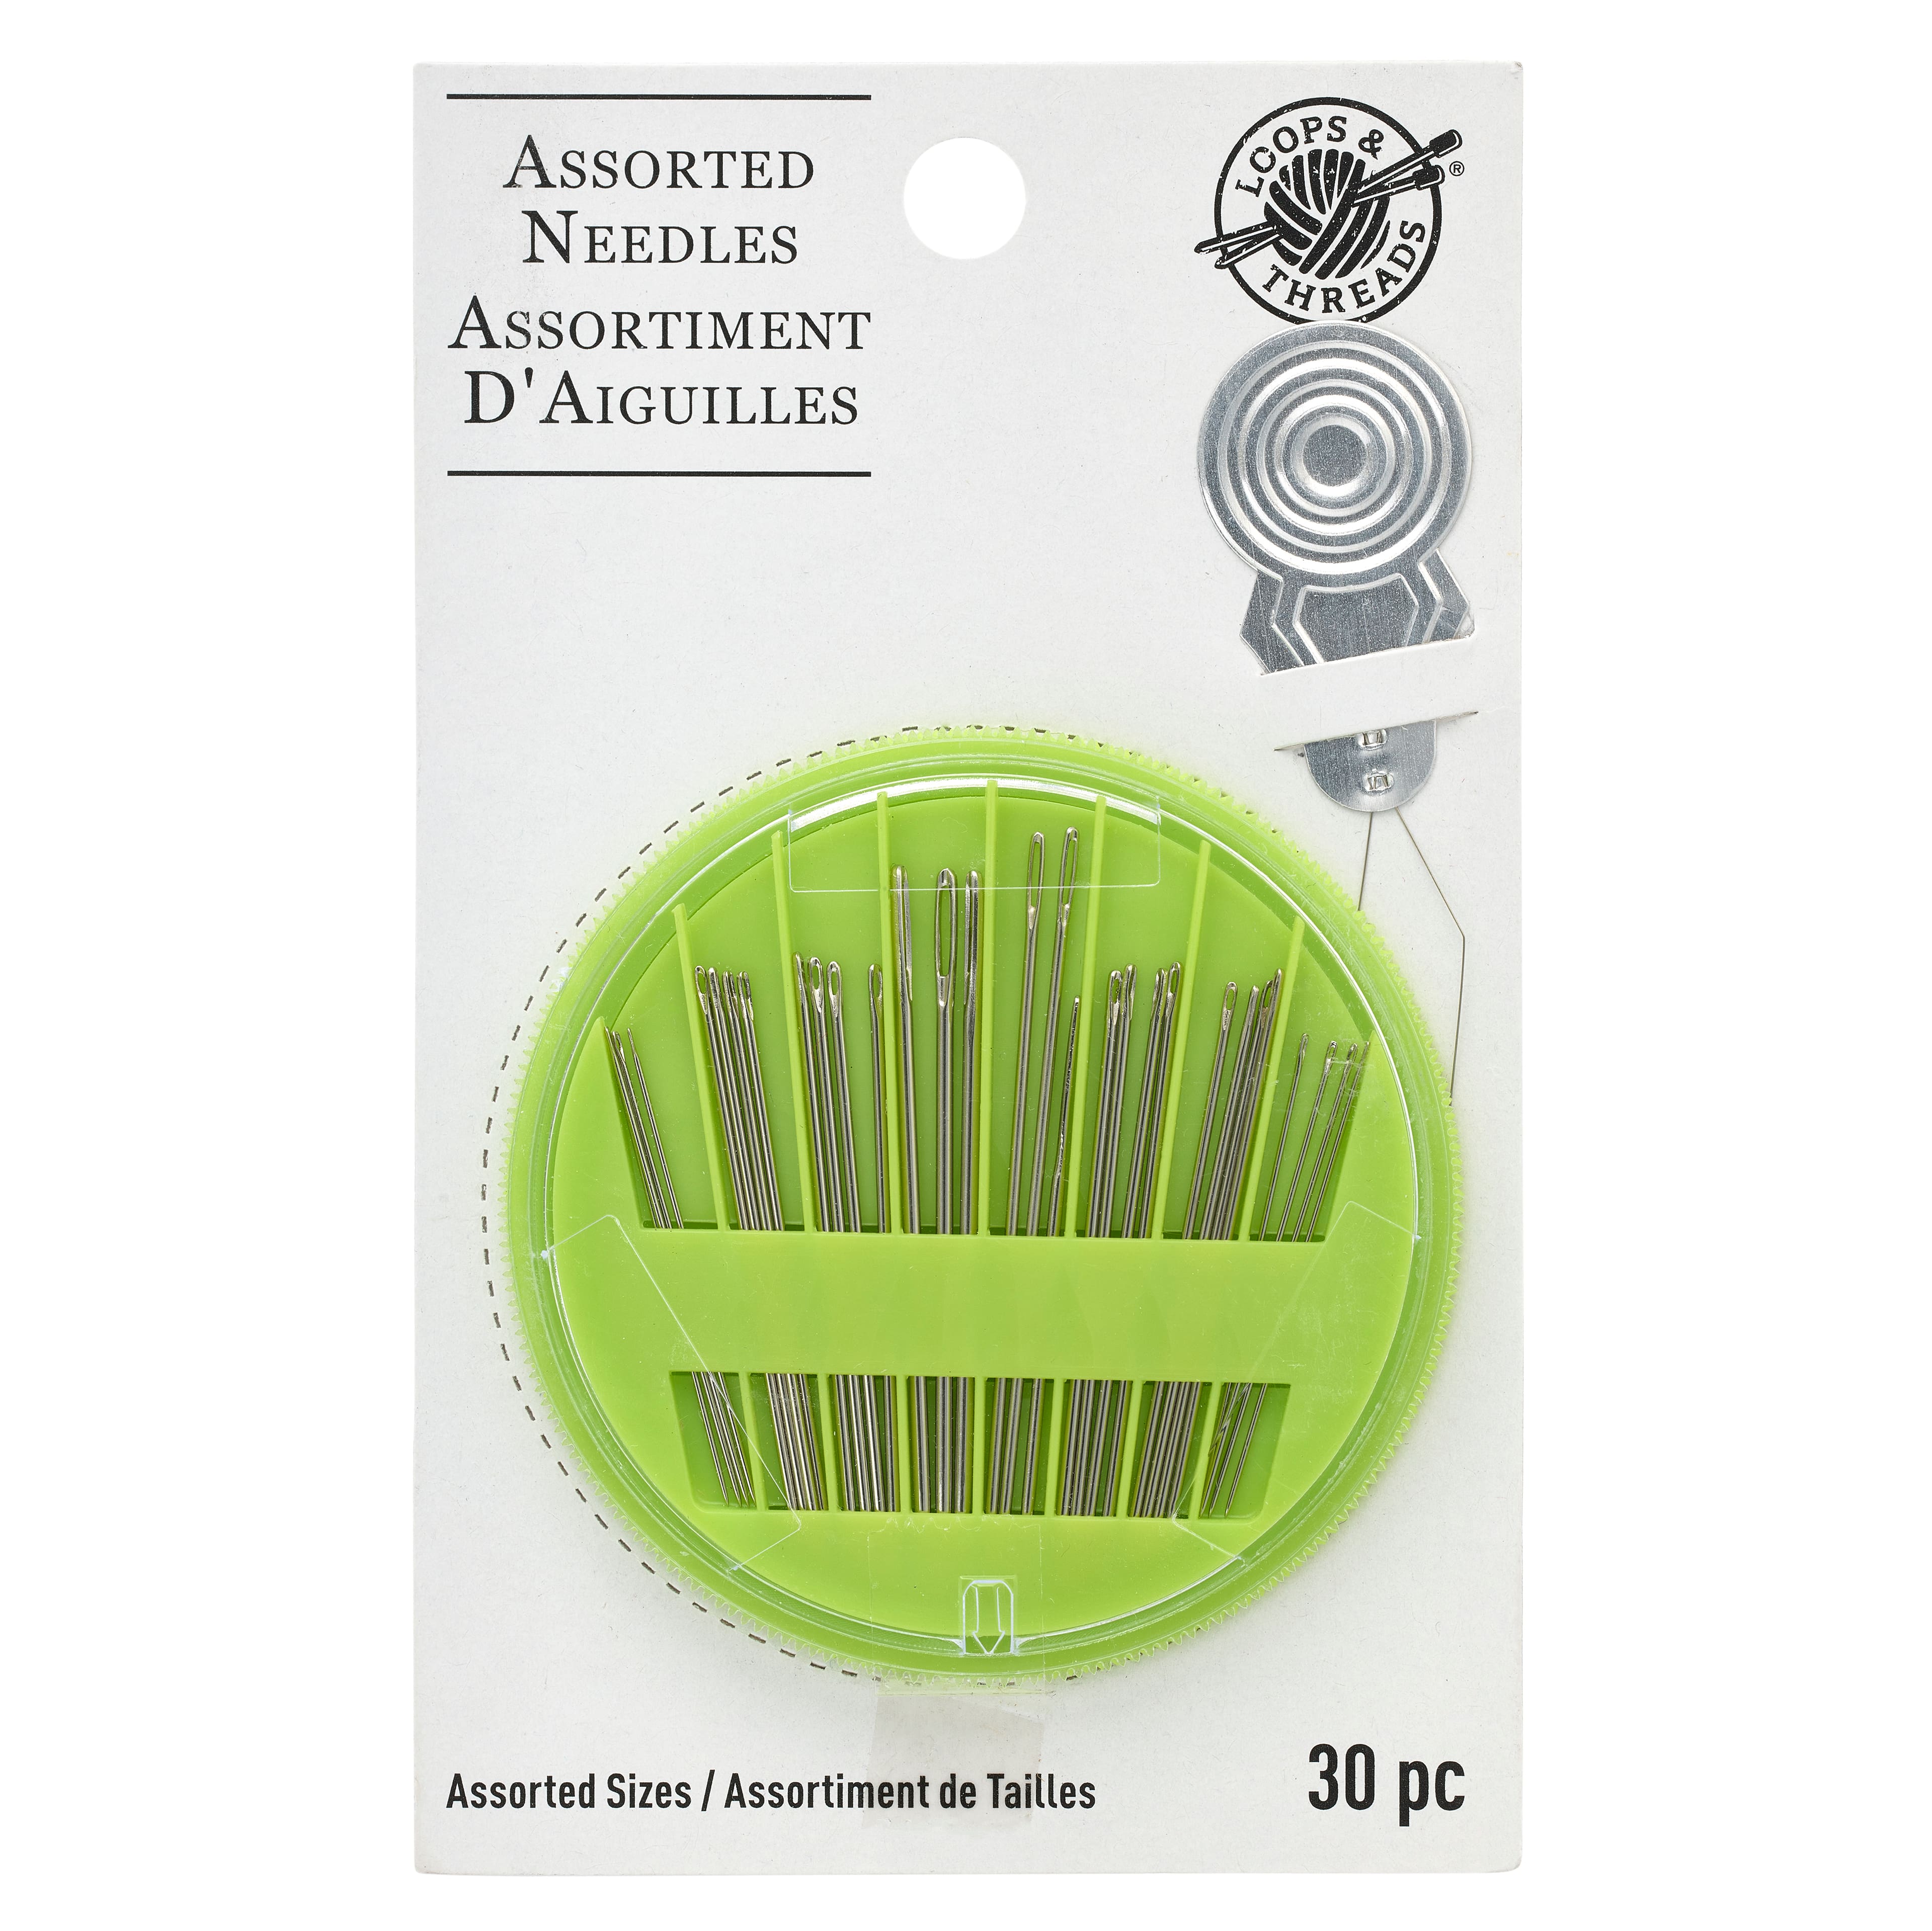  Heavy Duty Hand Sewing Needles Set - 12 Needles for